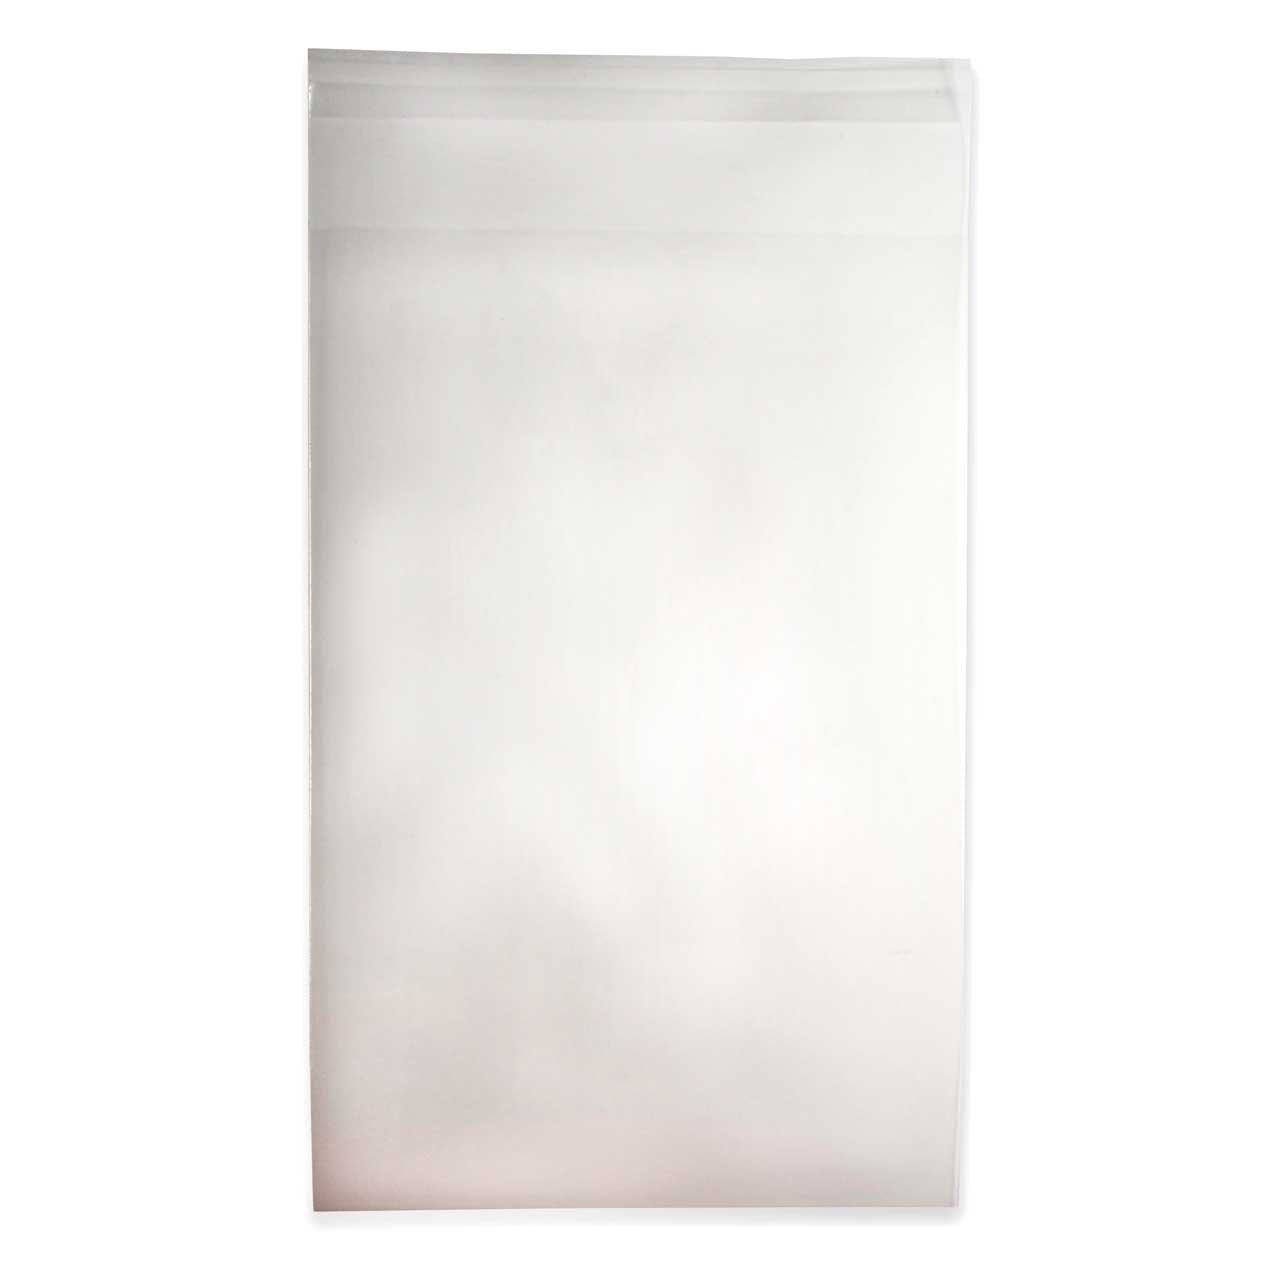 200X Clear Bags Reclosable Zipper Lock Plastic 2Mil Poly Jewelry 2